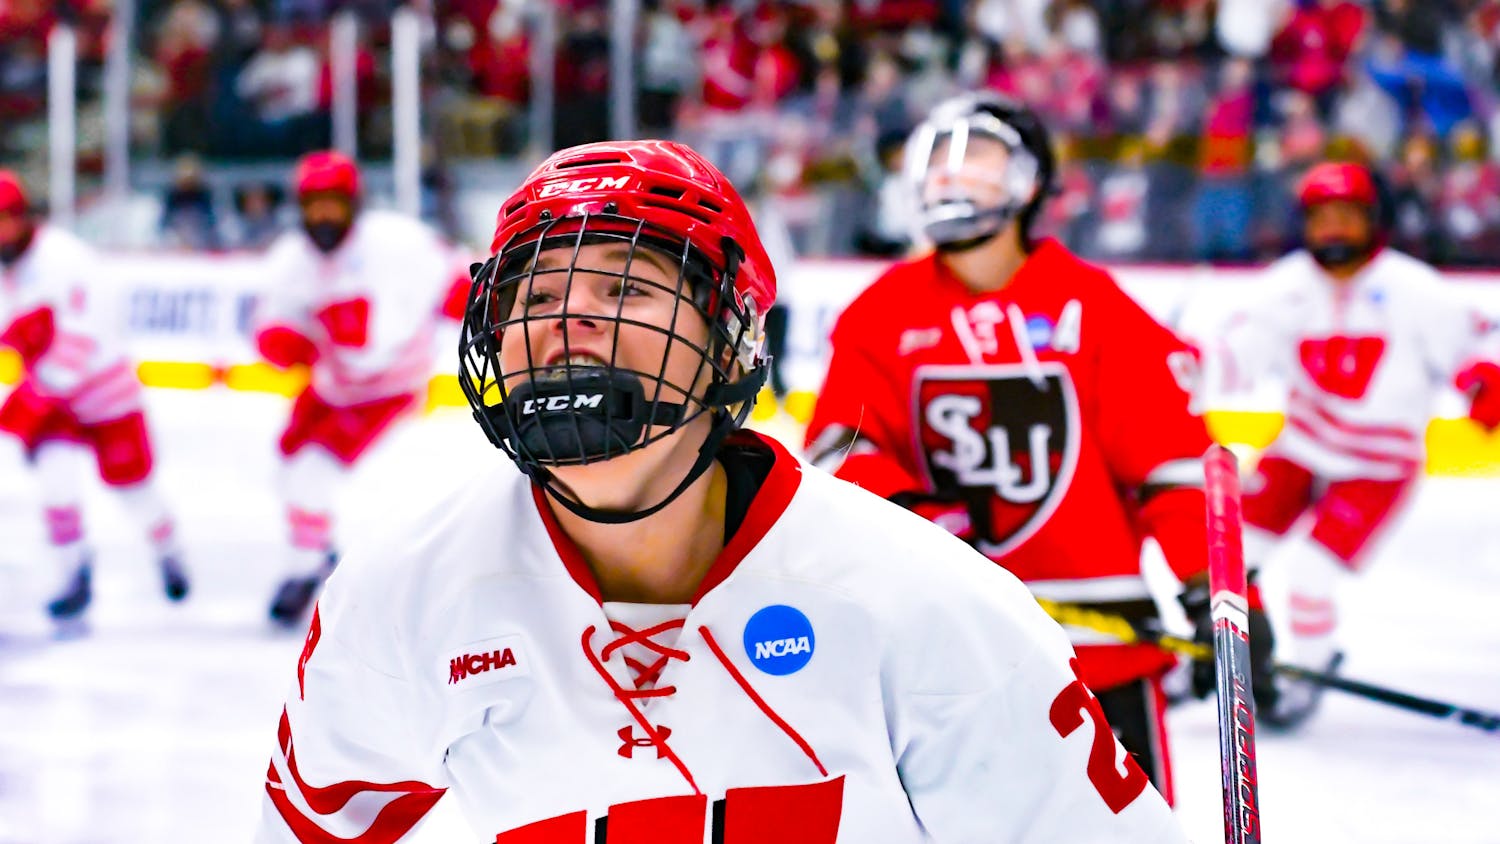 PHOTOS: Wisconsin Women's Hockey proceeds to the Frozen Four after dominating St Lawrence, 4-0